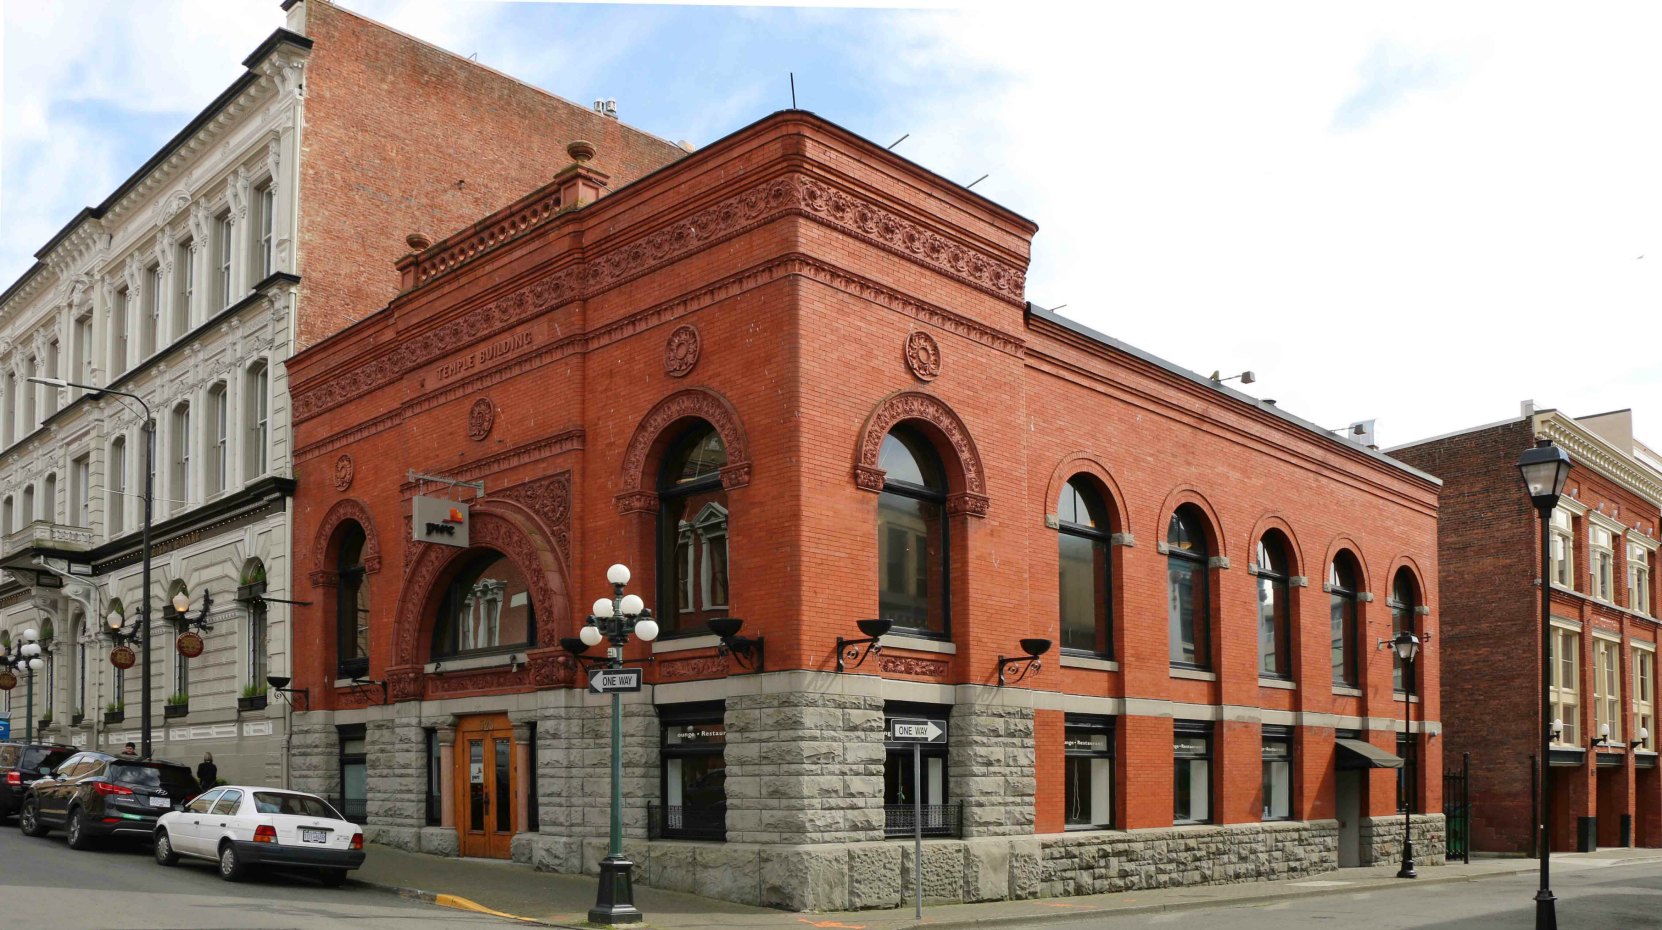 The Temple Building, 525 Fort Street. Designed by architect samuel Maclure in 1893 for Robert Ward & Co. (photo by Victoria Online Sightseeing Tours)